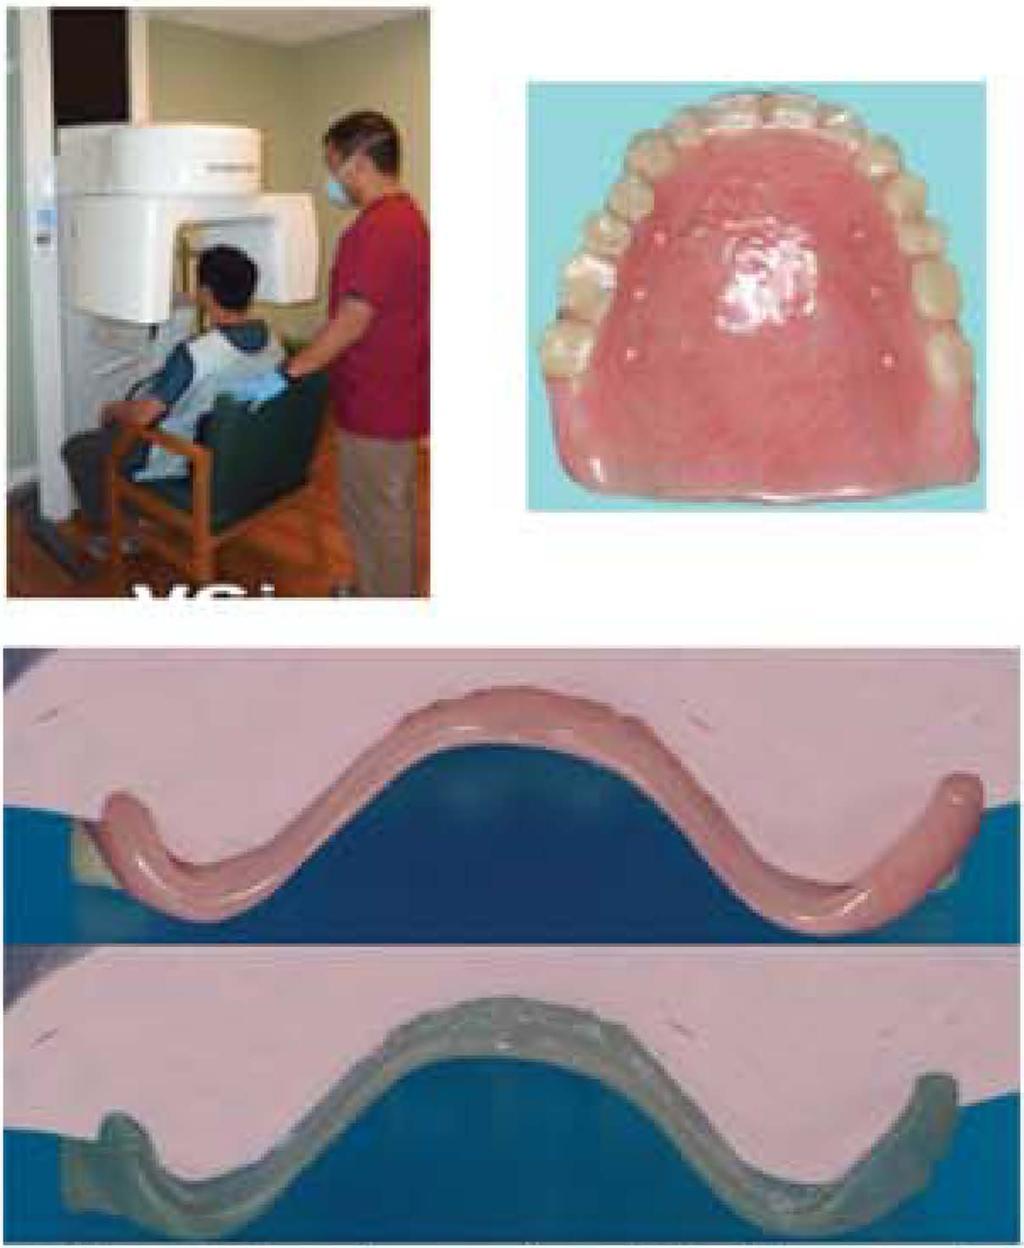 They facilitate the merge of the scanned denture to the CBCT scan.